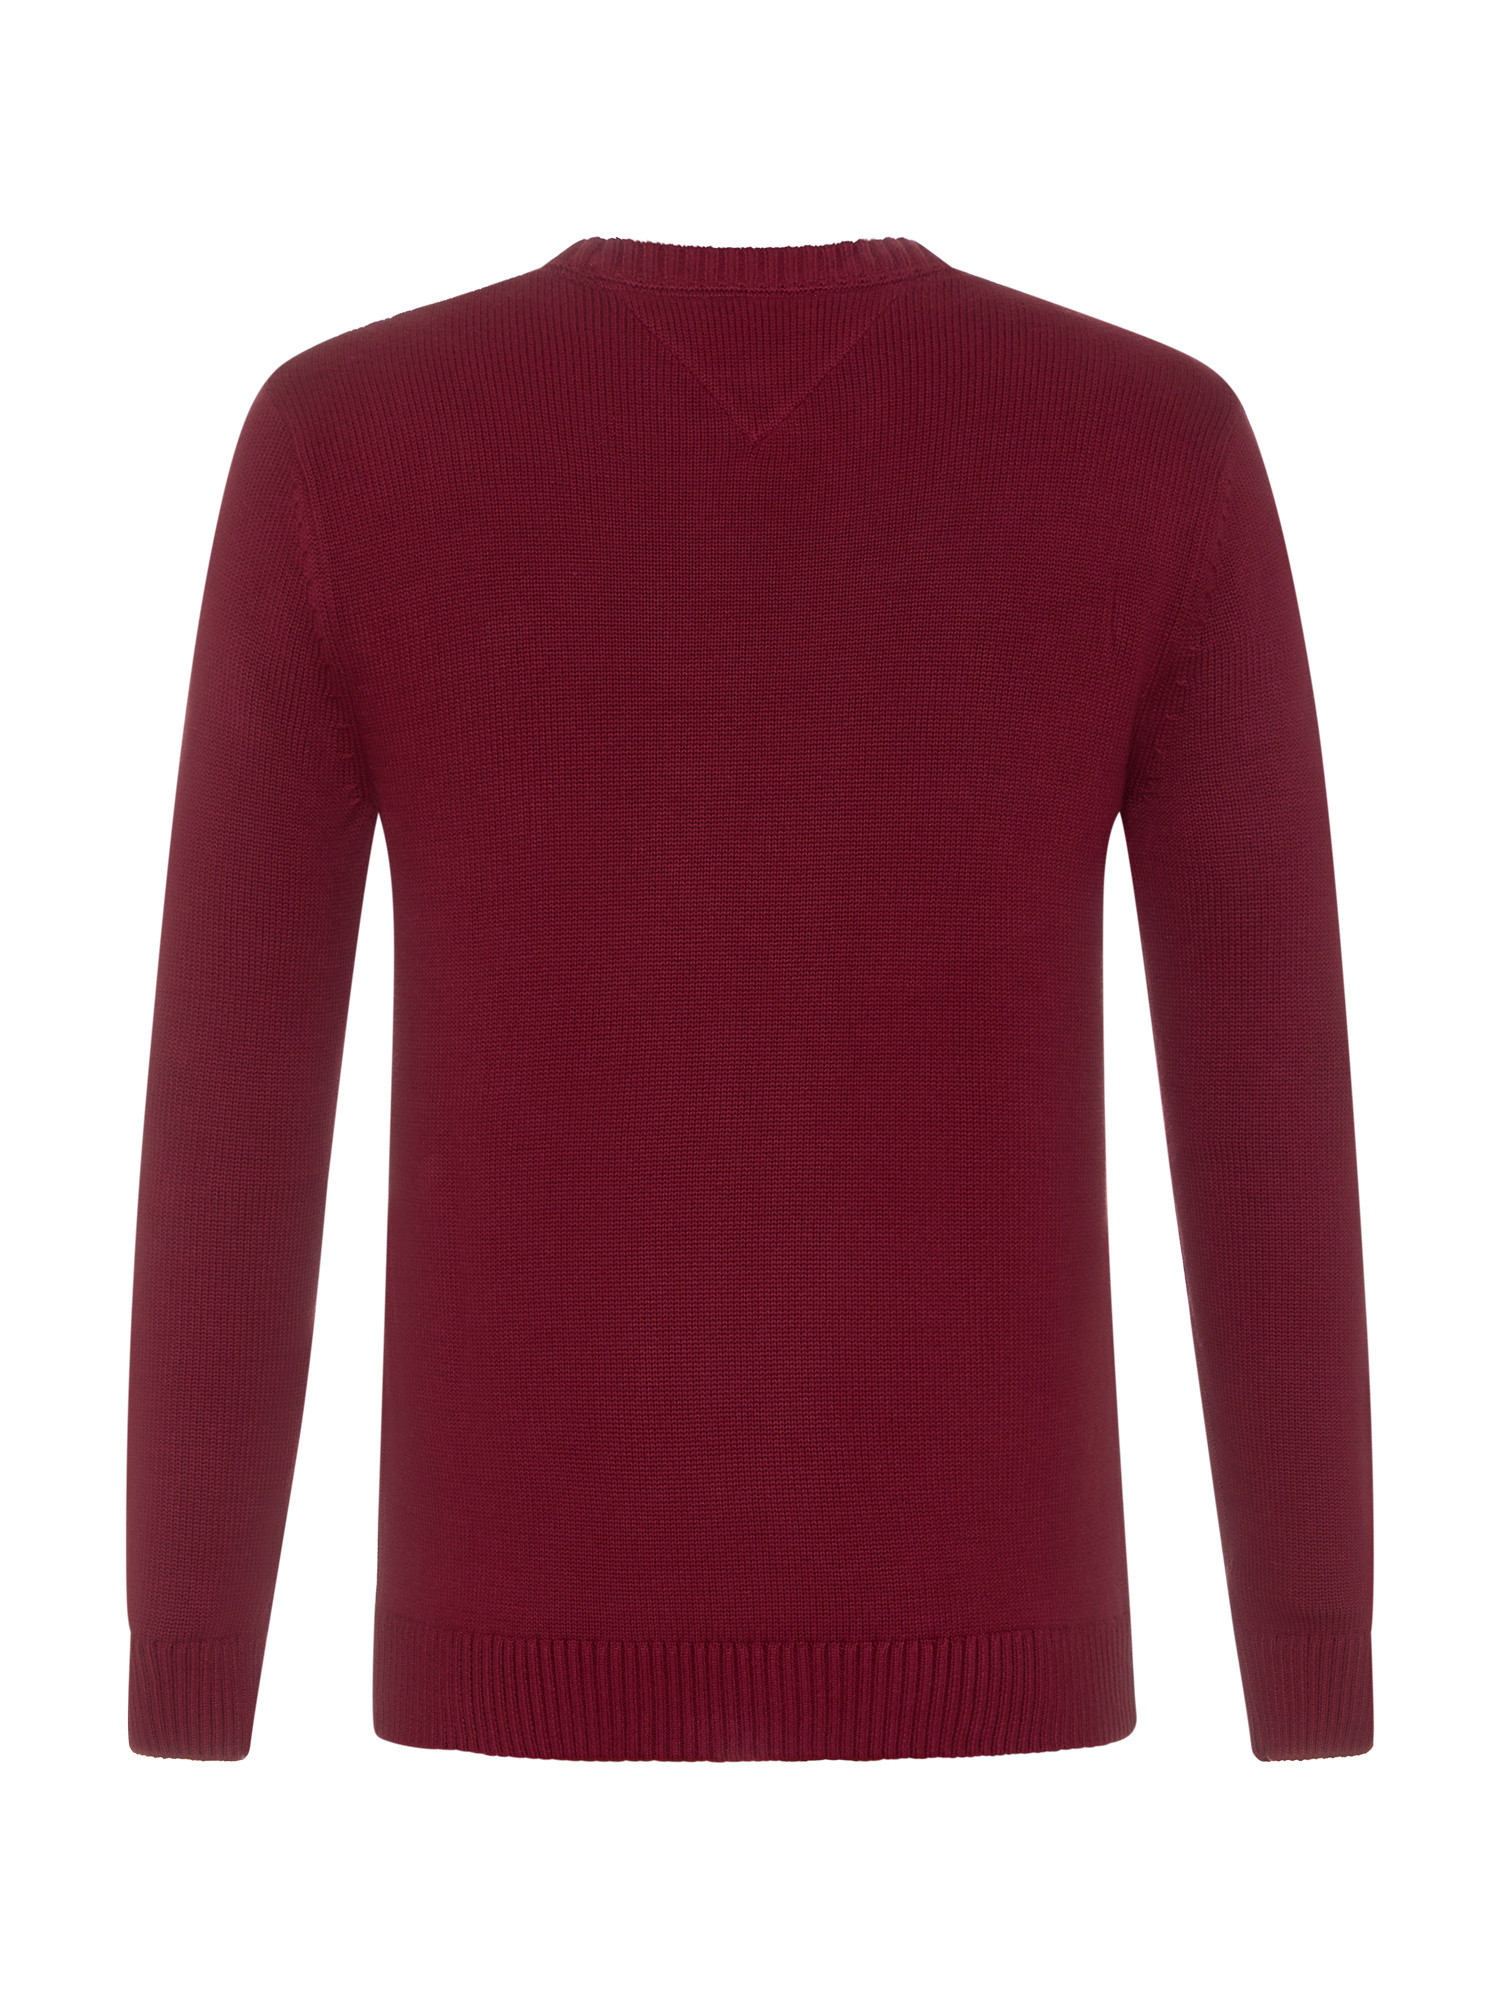 Tommy Jeans - Regular fit cotton sweater with micro logo, Red, large image number 1